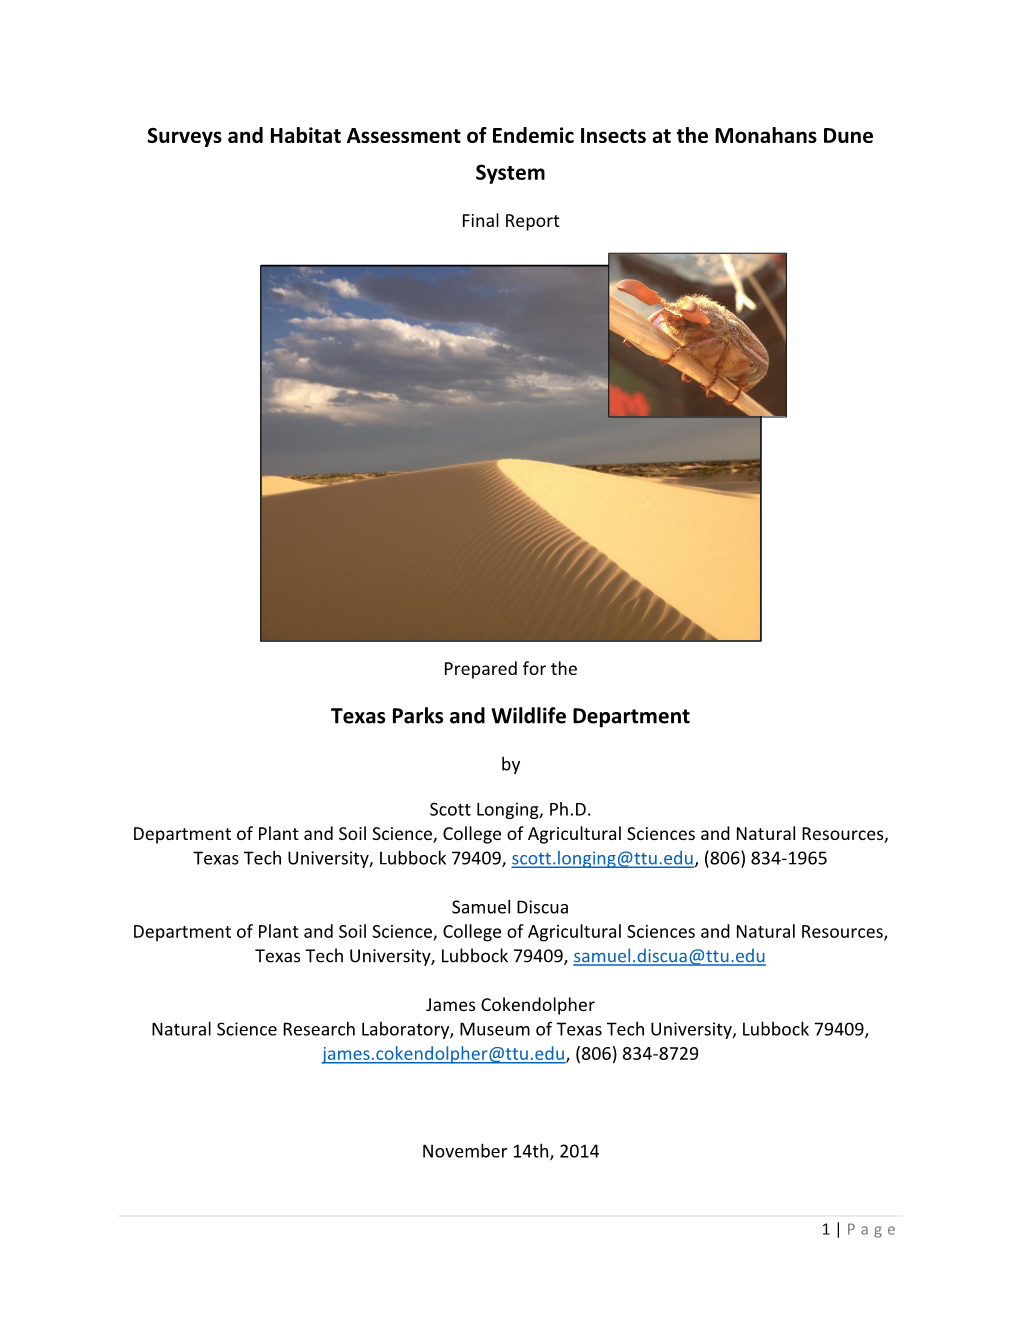 Surveys and Habitat Assessment of Endemic Insects at the Monahans Dune System